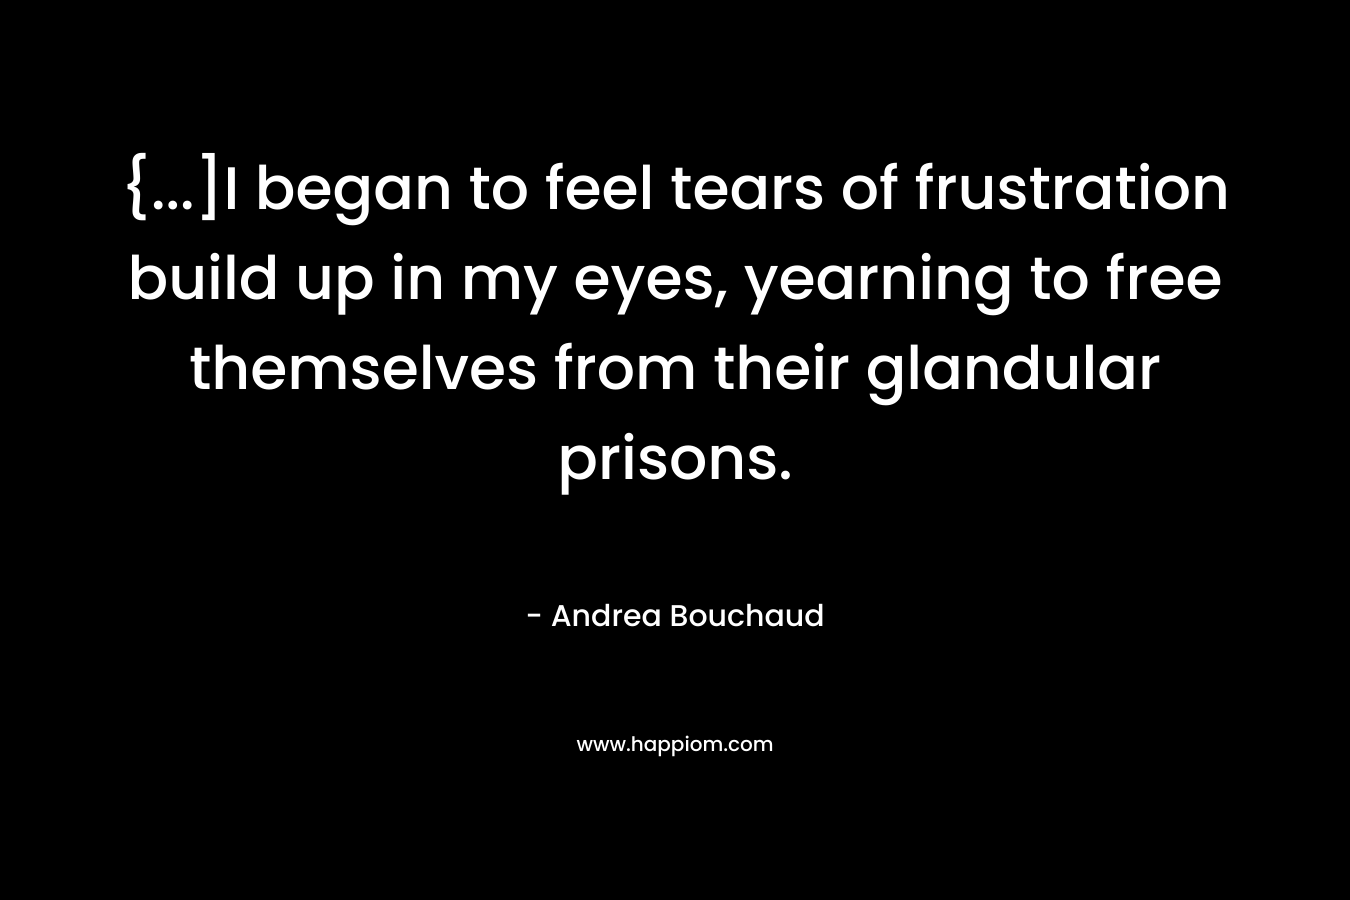 {…]I began to feel tears of frustration build up in my eyes, yearning to free themselves from their glandular prisons. – Andrea Bouchaud